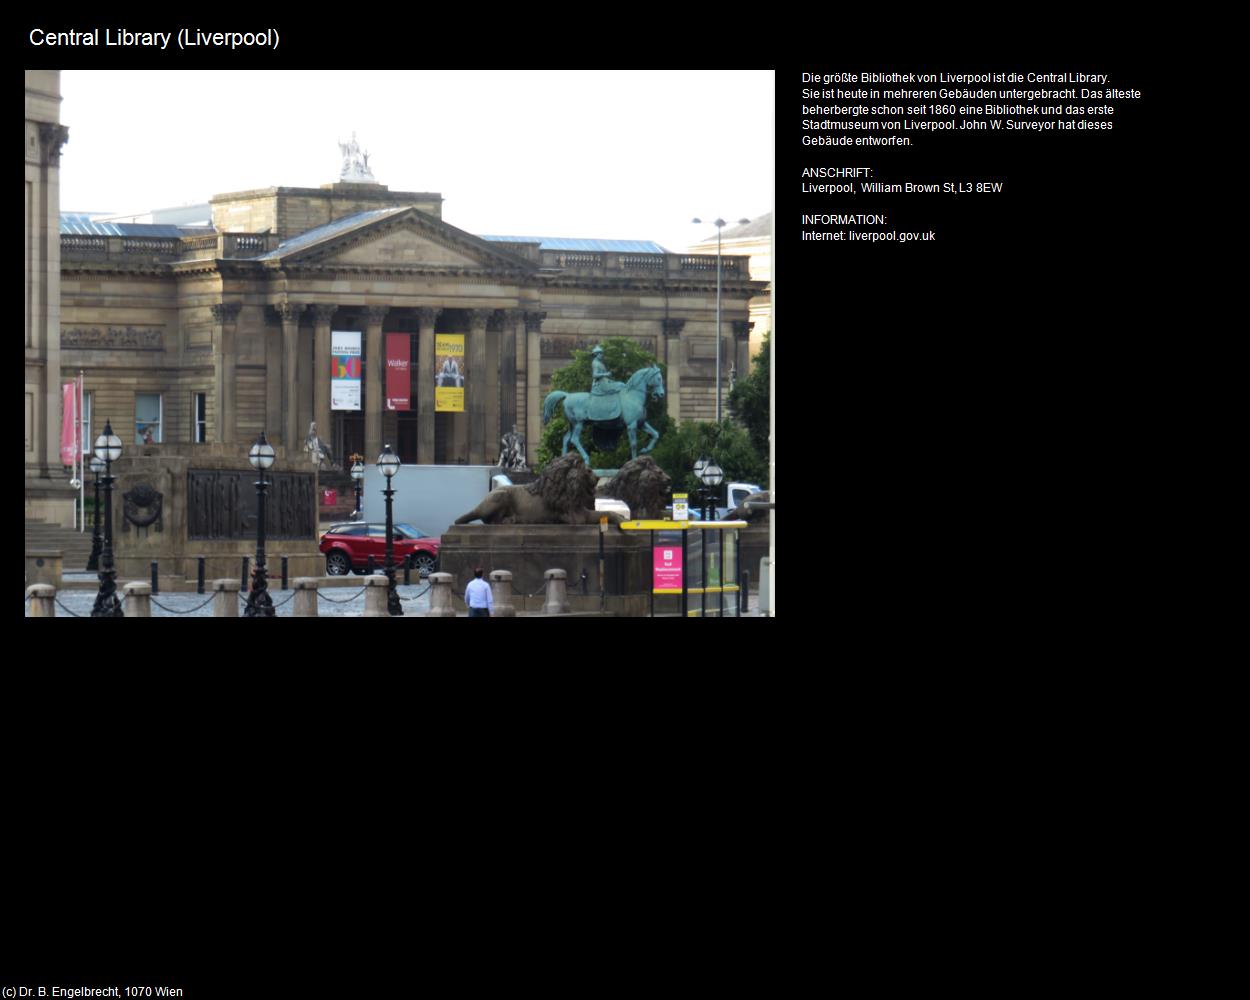 Central Library  (Liverpool, England) in Kulturatlas-ENGLAND und WALES